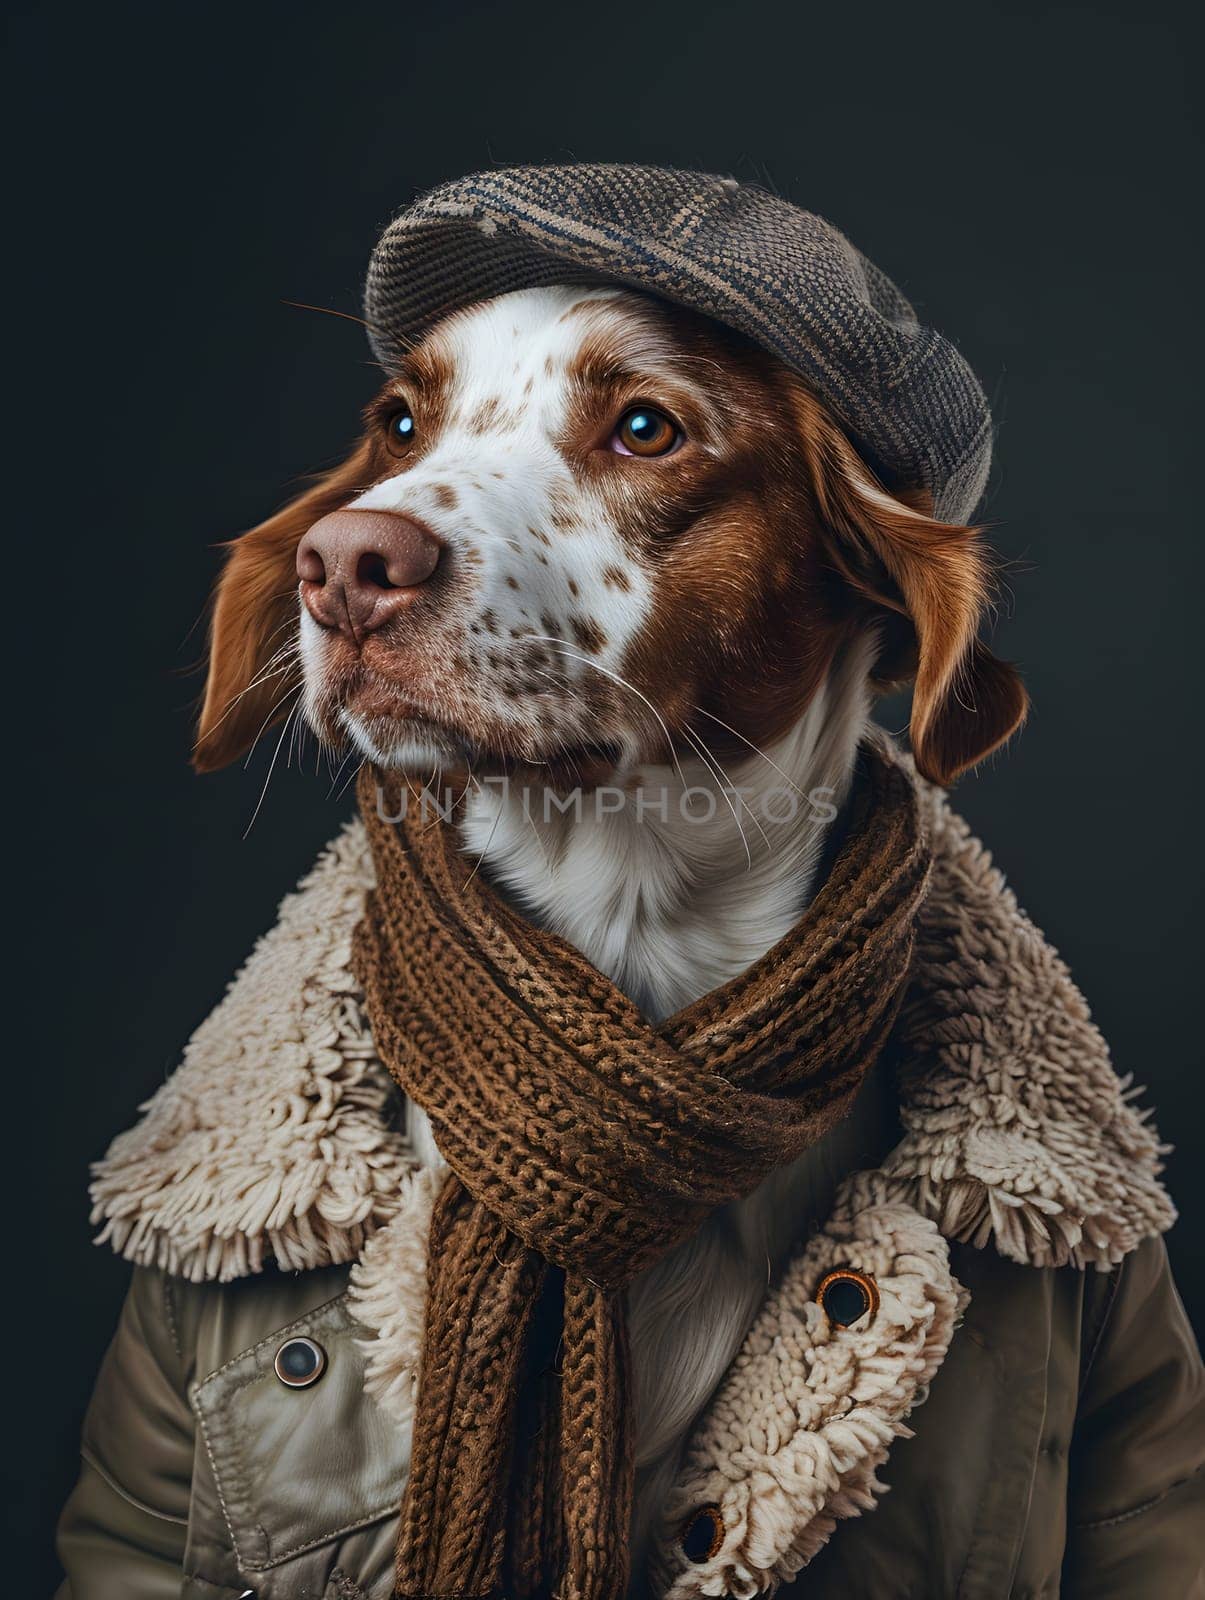 Carnivore Braque francais Dog breed wearing hat and scarf by Nadtochiy